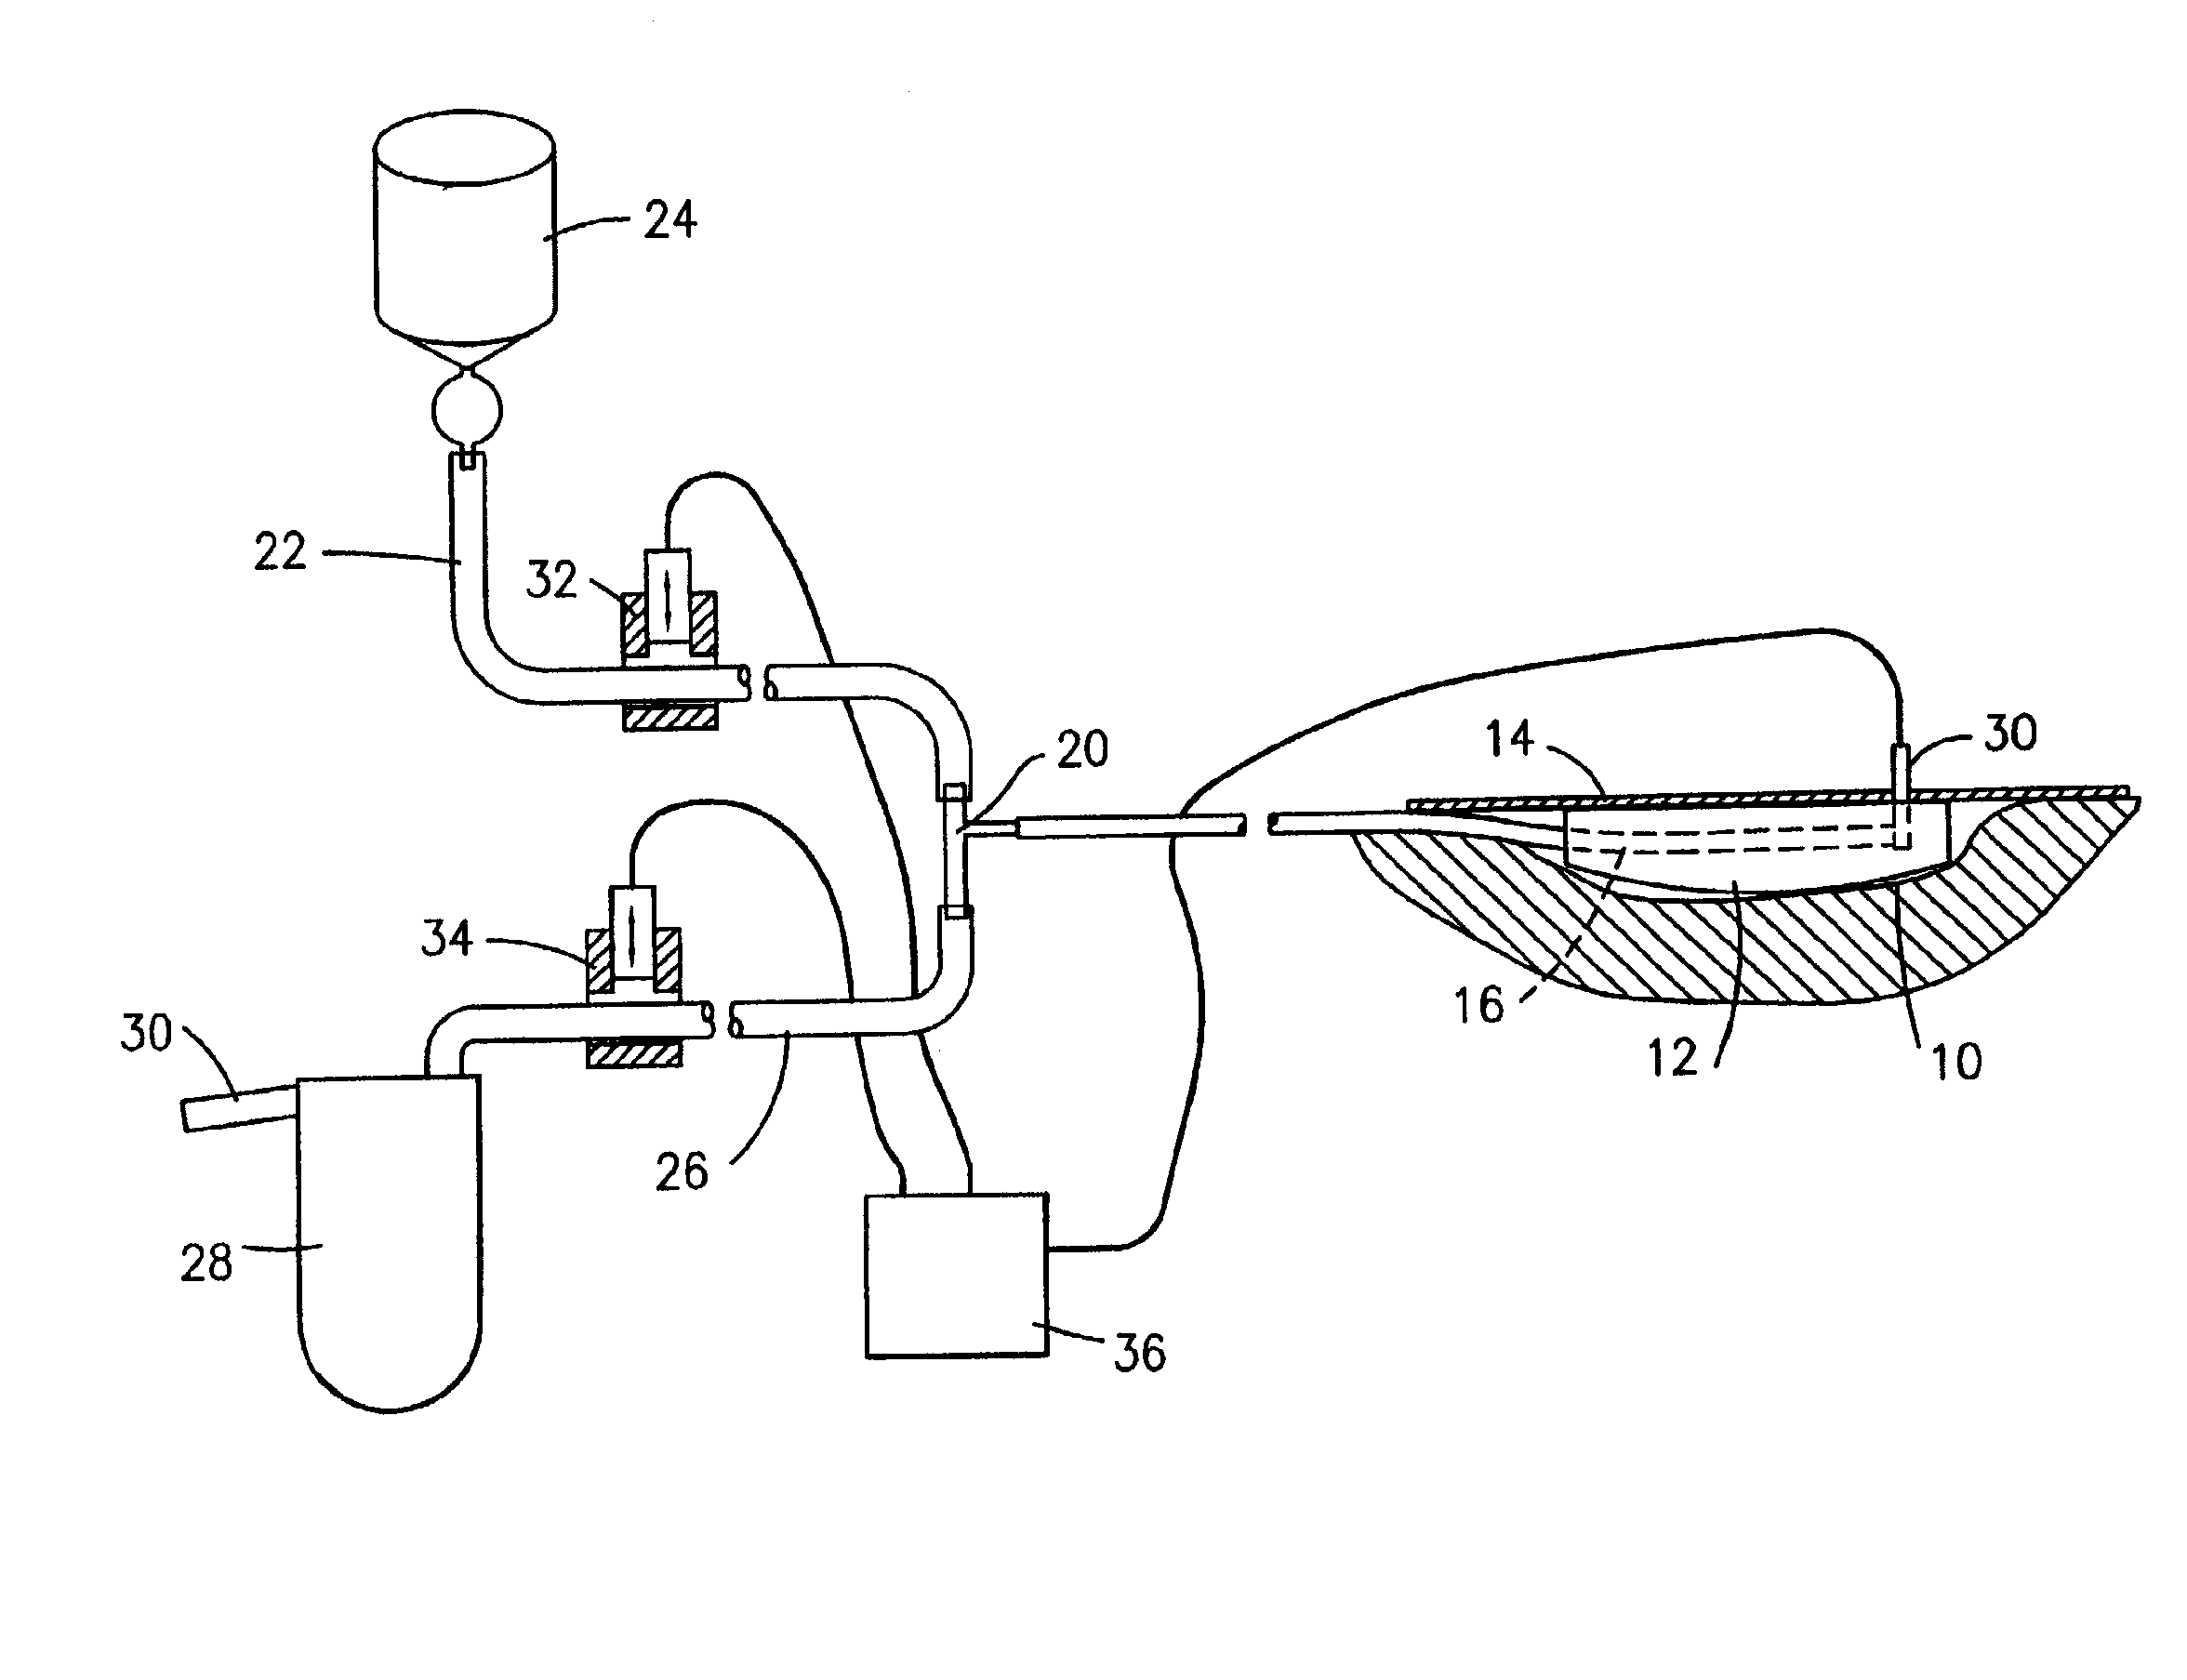 Process and device for application of active substances to a wound surface